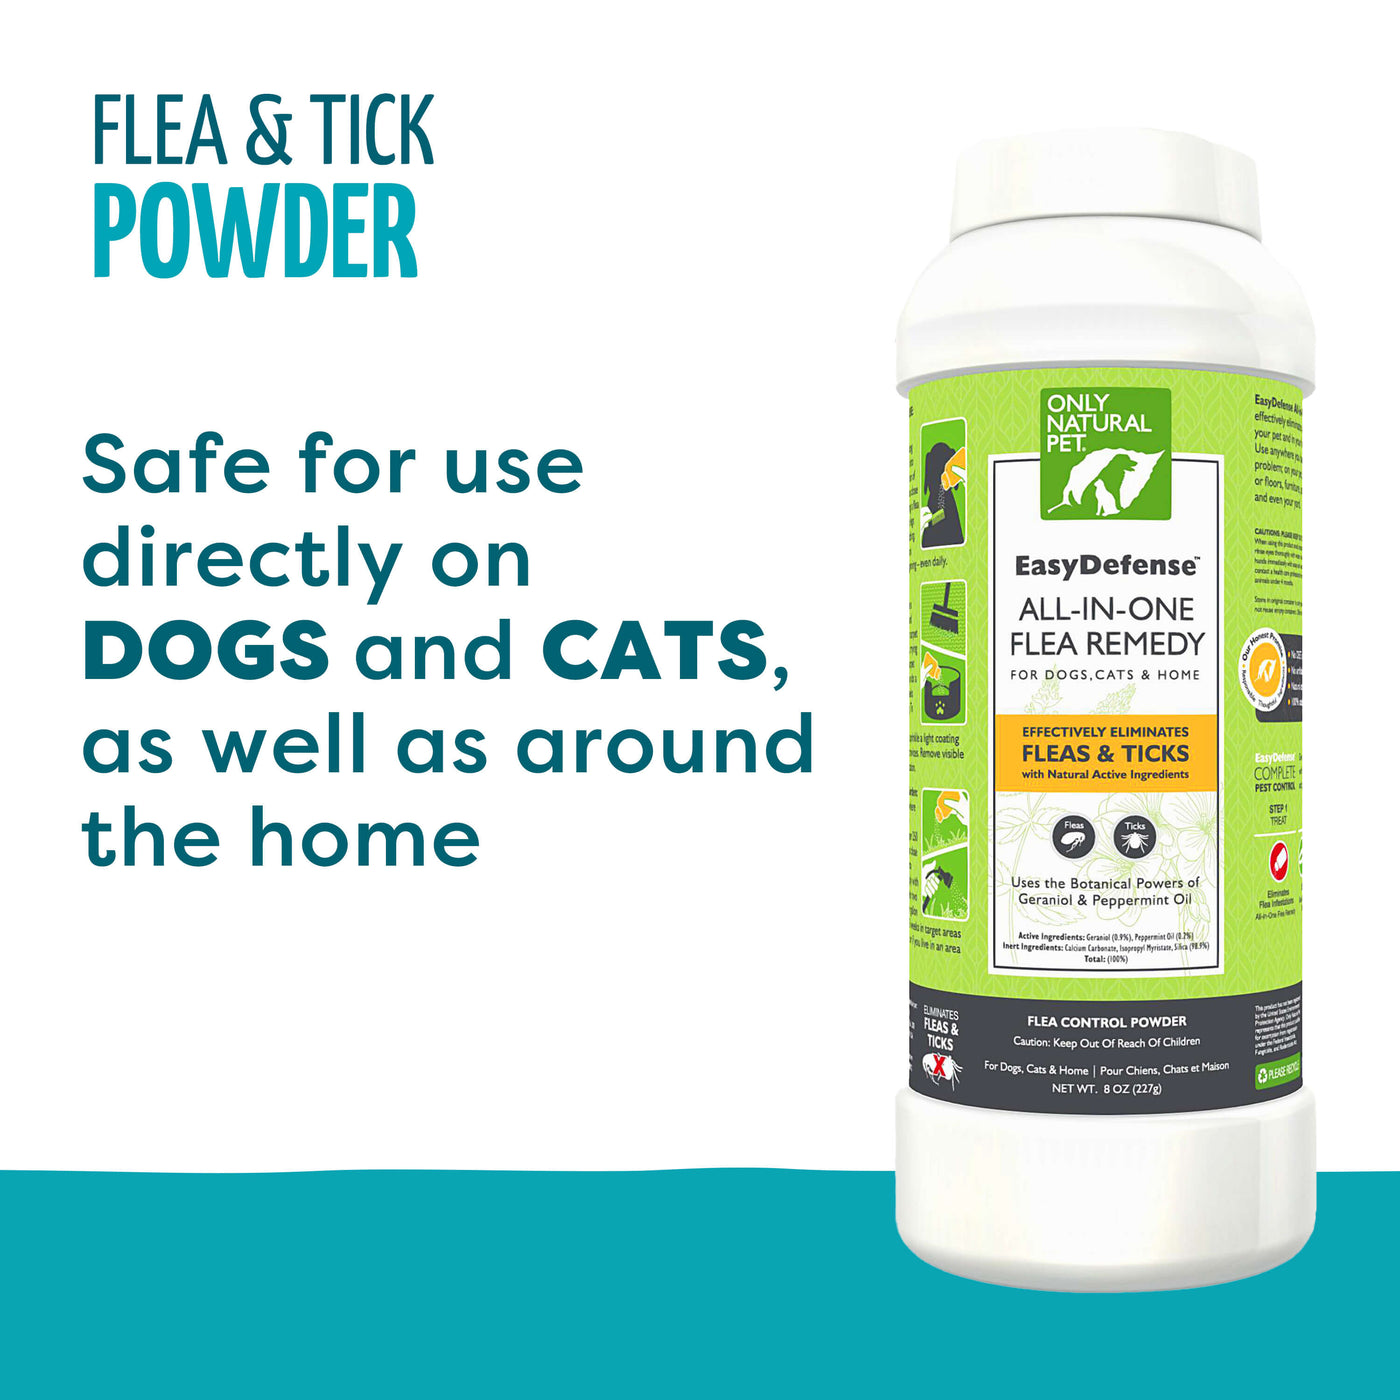 All In One Flea Remedy Powder For Dogs Cats Only Natural Pet